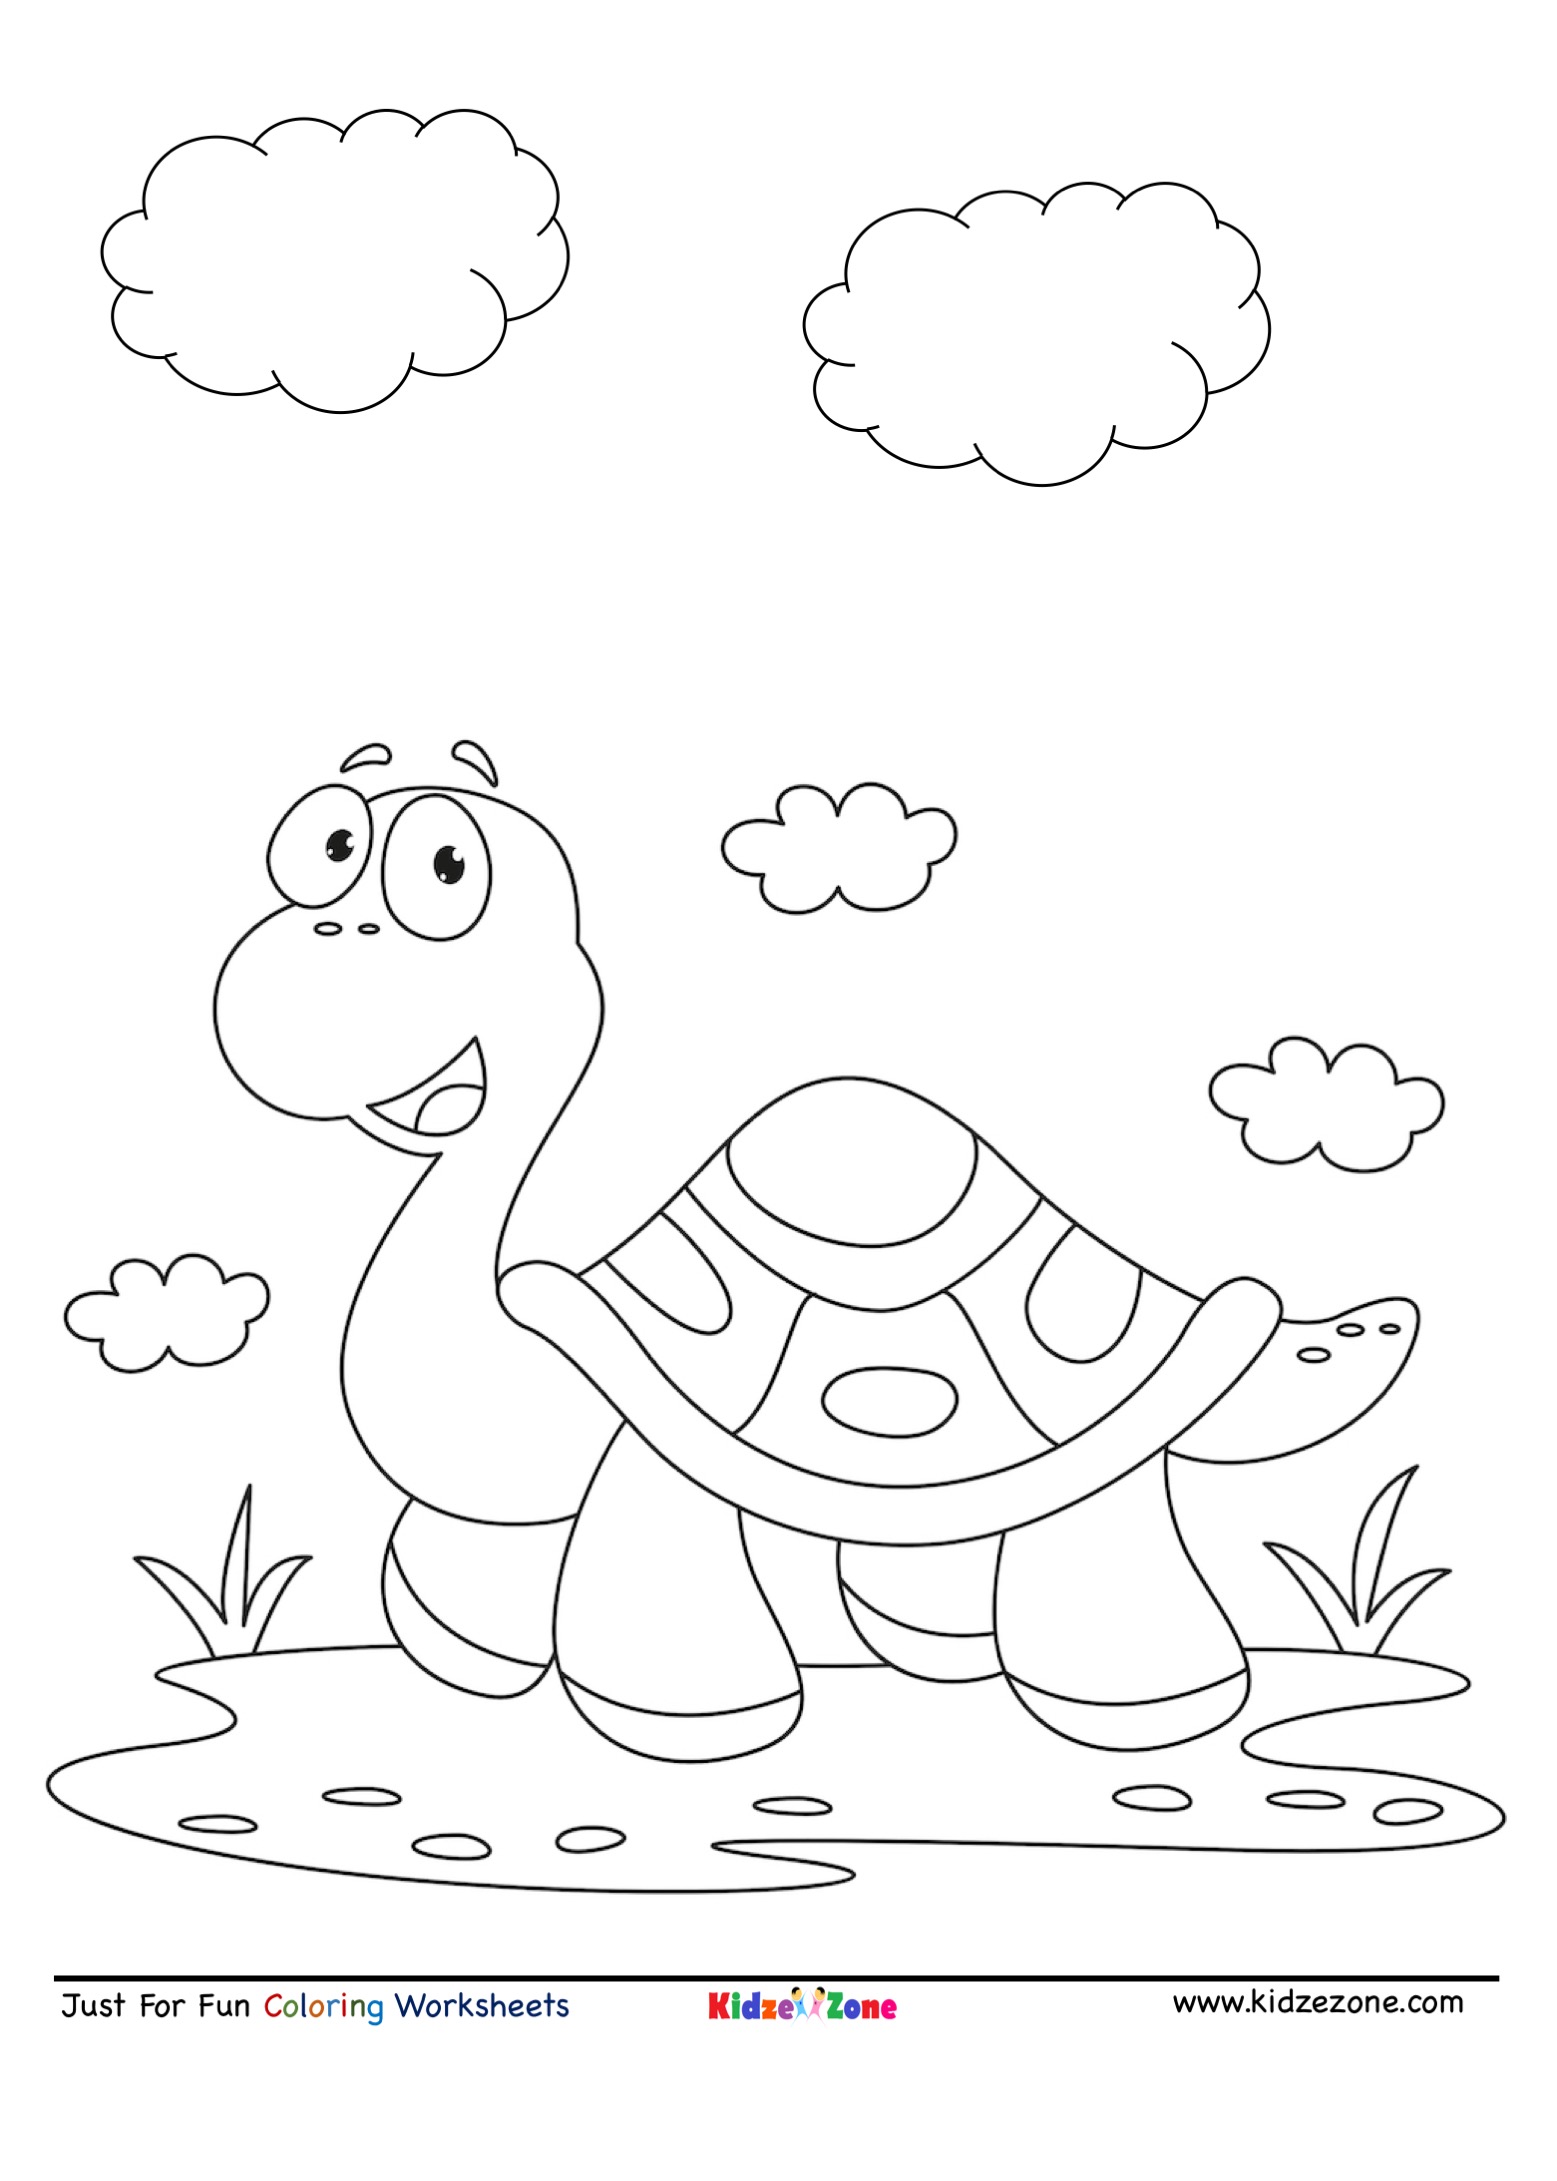 Tortoise cartoon coloring page